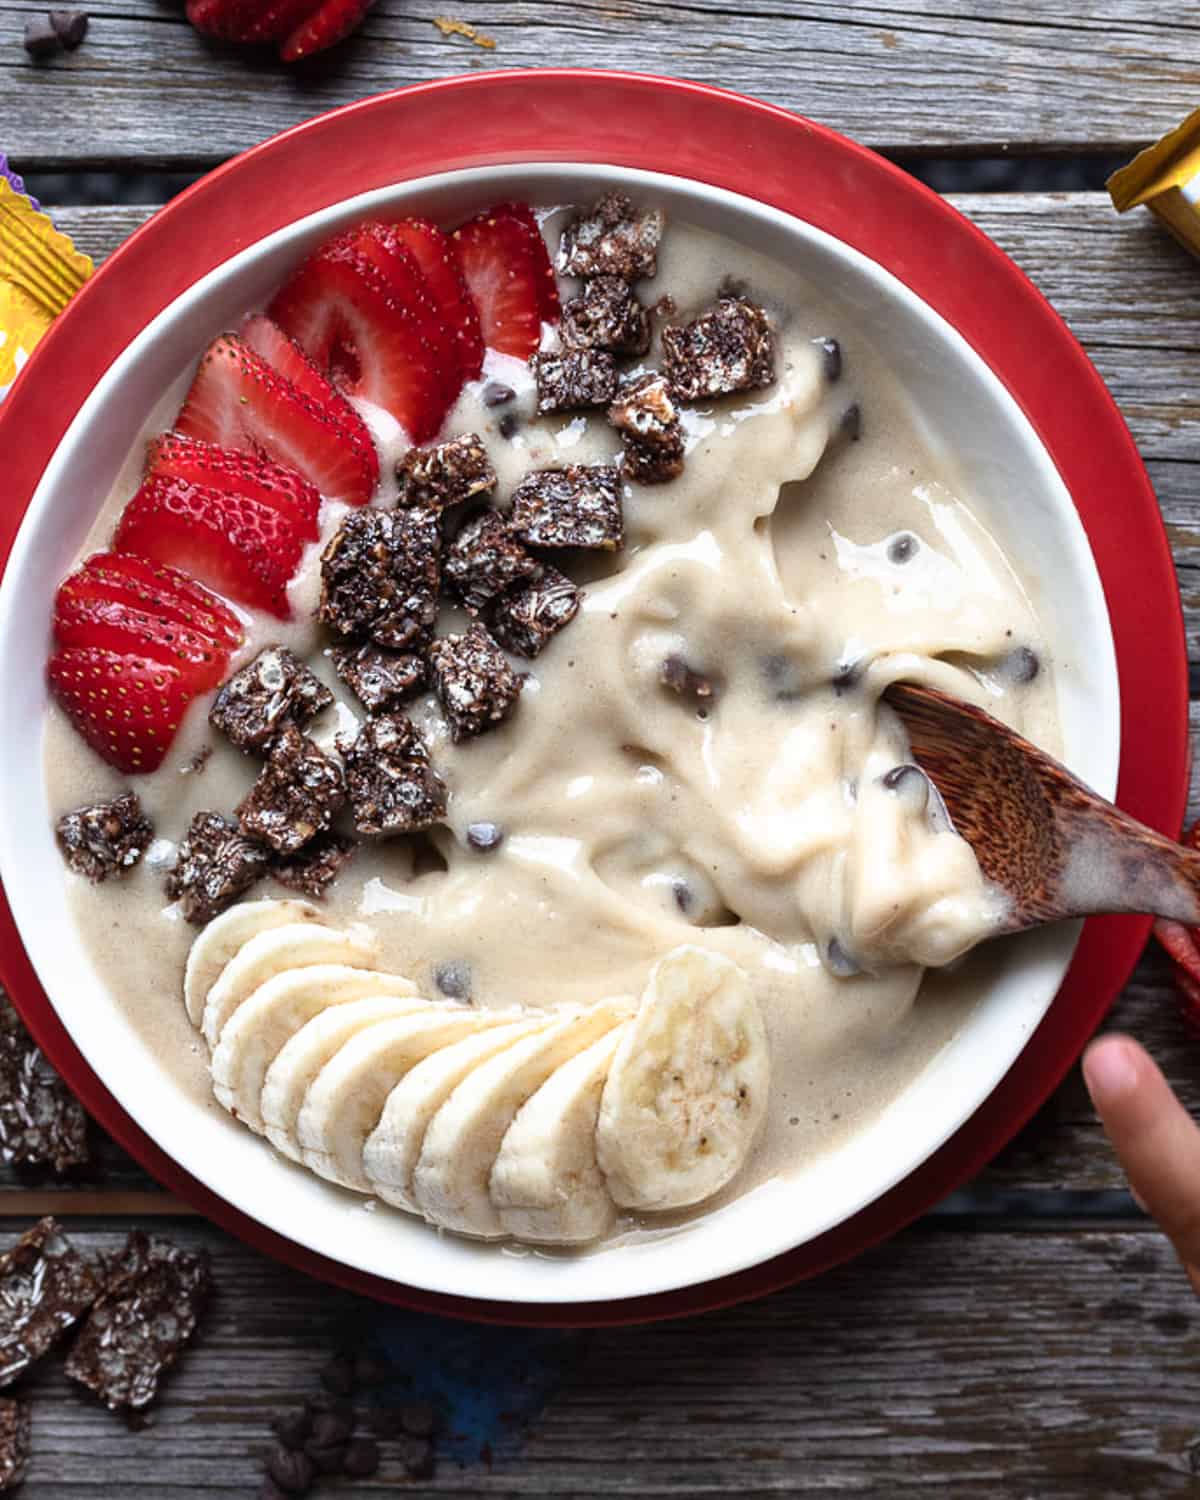 Image of asmoothie bowl topped with fresh strawberries, granola and fresh bananas. This image is to show a recipe option a post on tips and meal ideas for picky eaters.